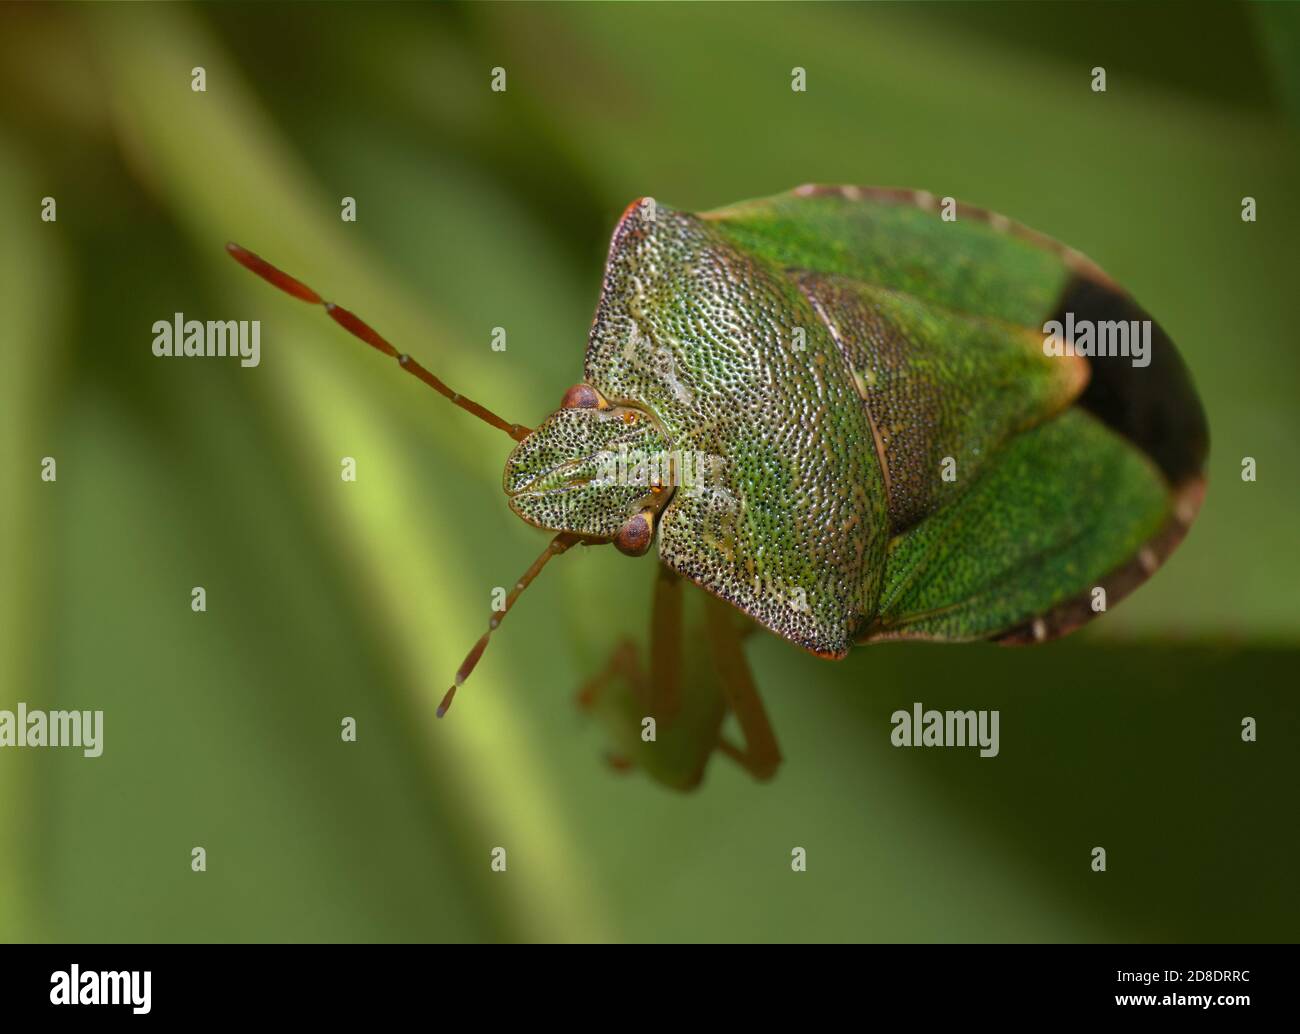 green shield bug close up in macro on grass stem Stock Photo